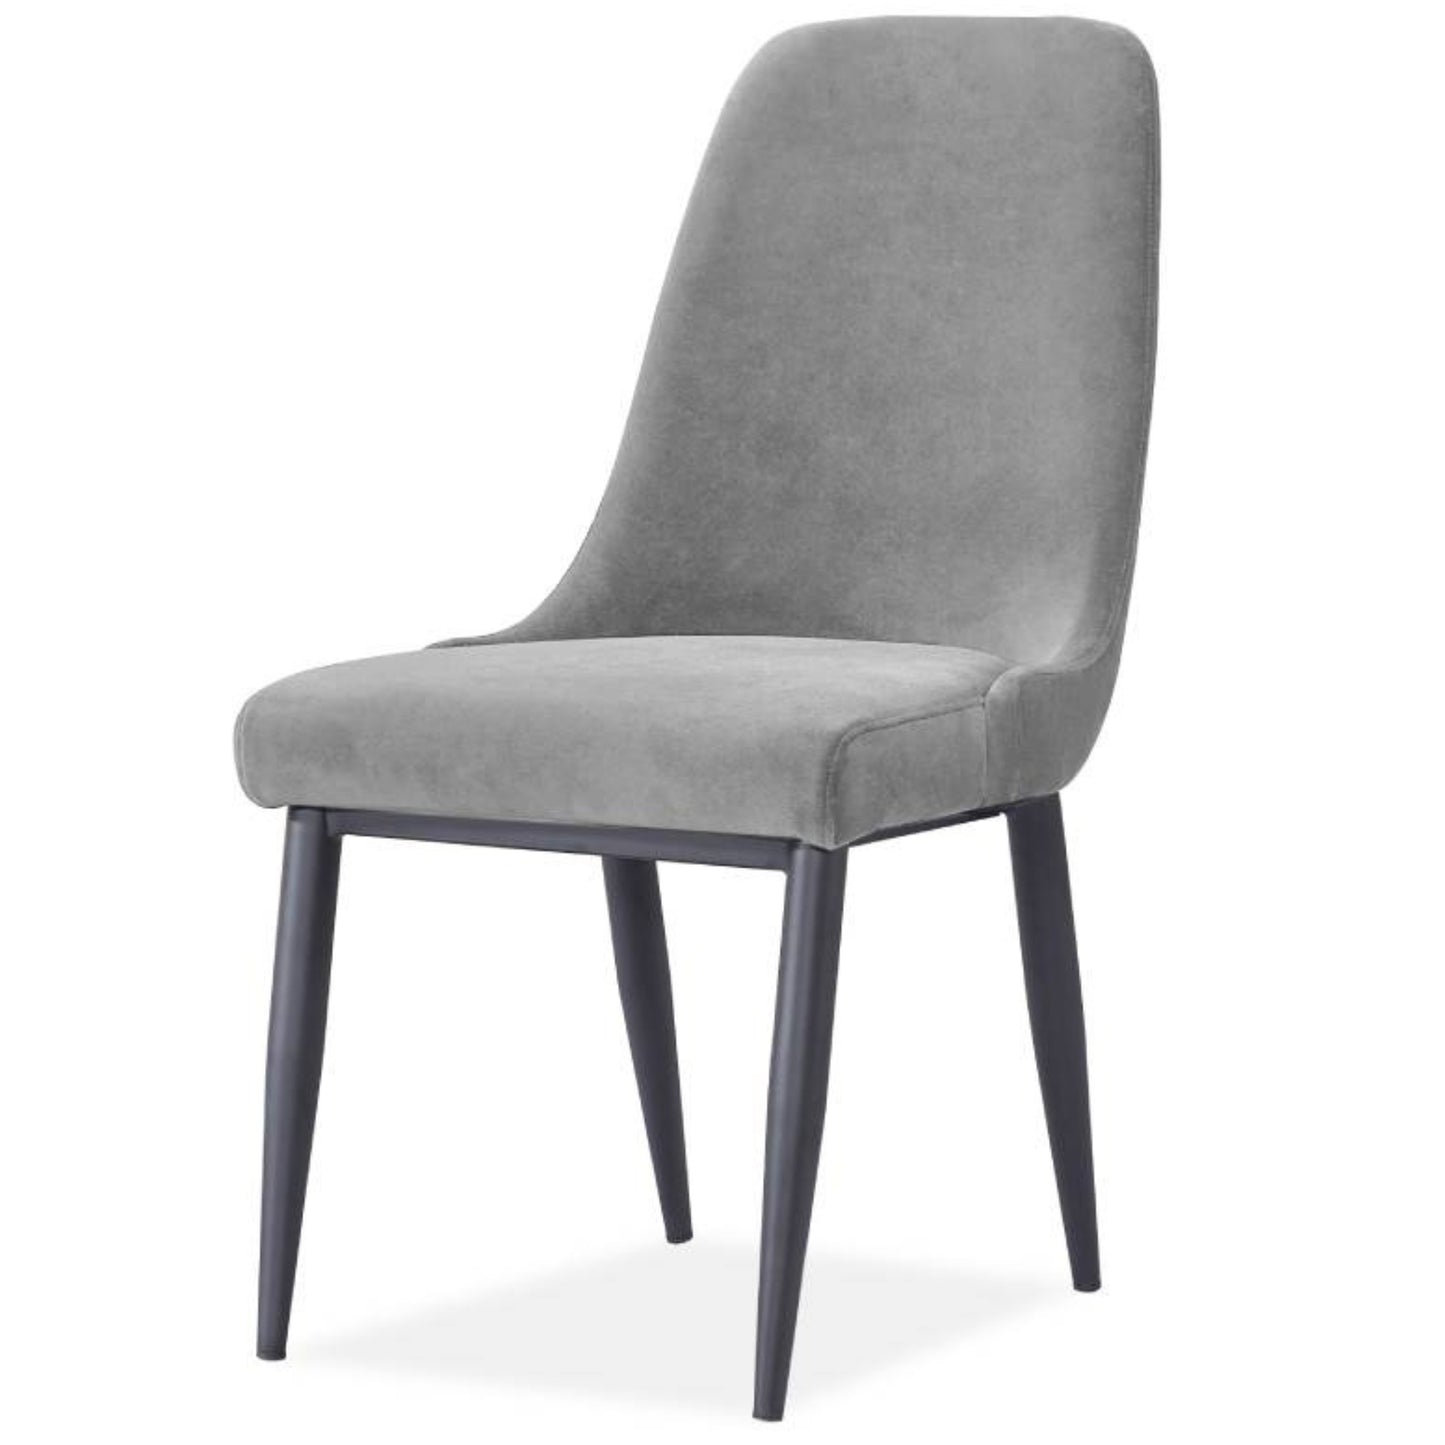 Eva Dining Chair Set of 6 Fabric Seat with Metal Frame - Grey